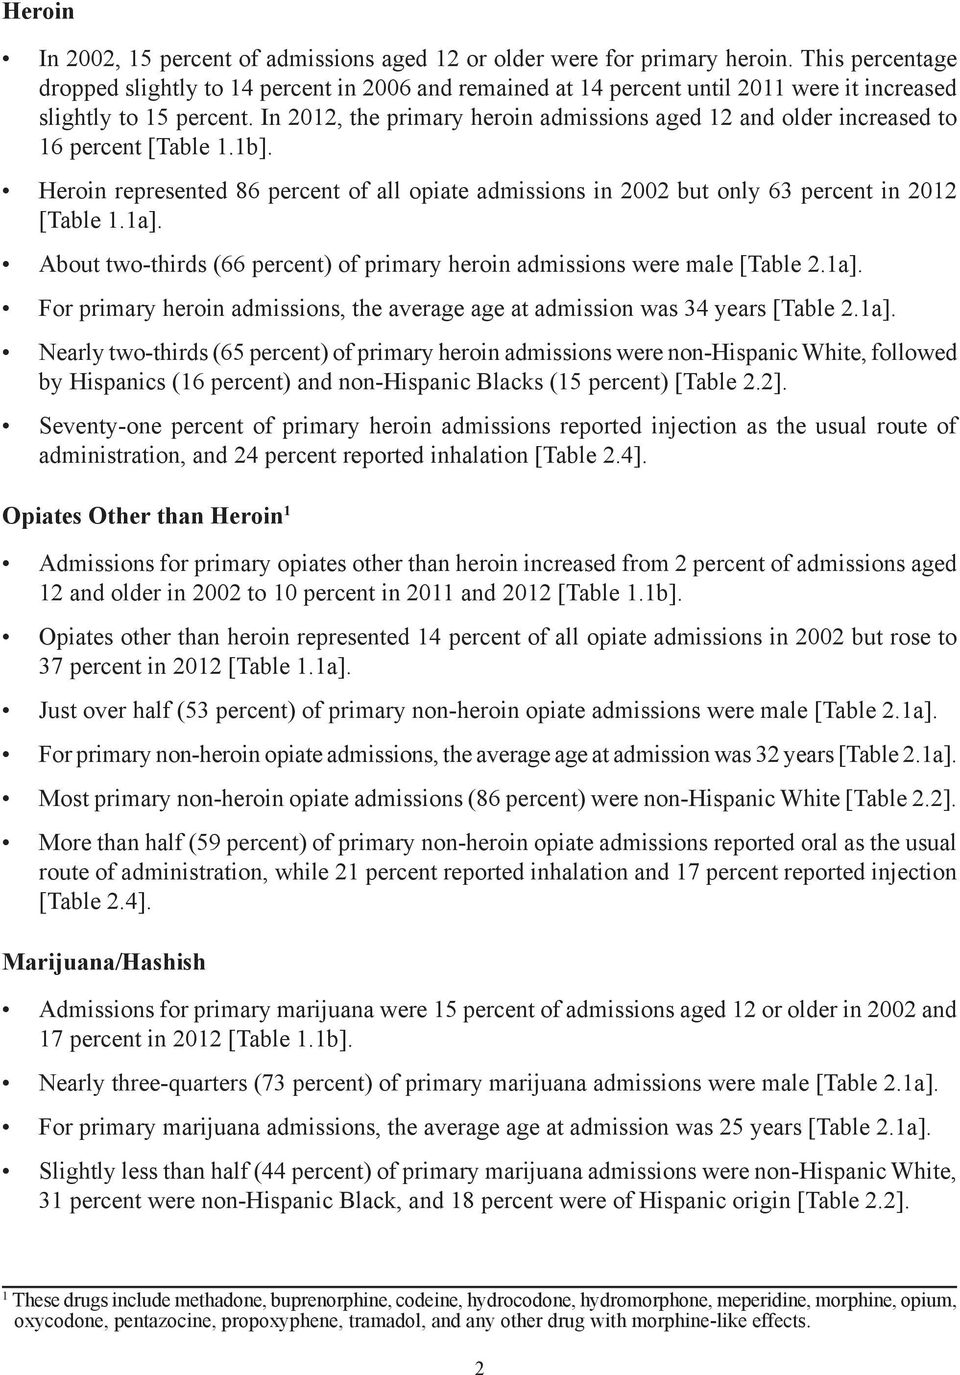 In 2012, the primary heroin admissions aged 12 and older increased to 16 percent [Table 1.1b]. Heroin represented 86 percent of all opiate admissions in 2002 but only 63 percent in 2012 [Table 1.1a].